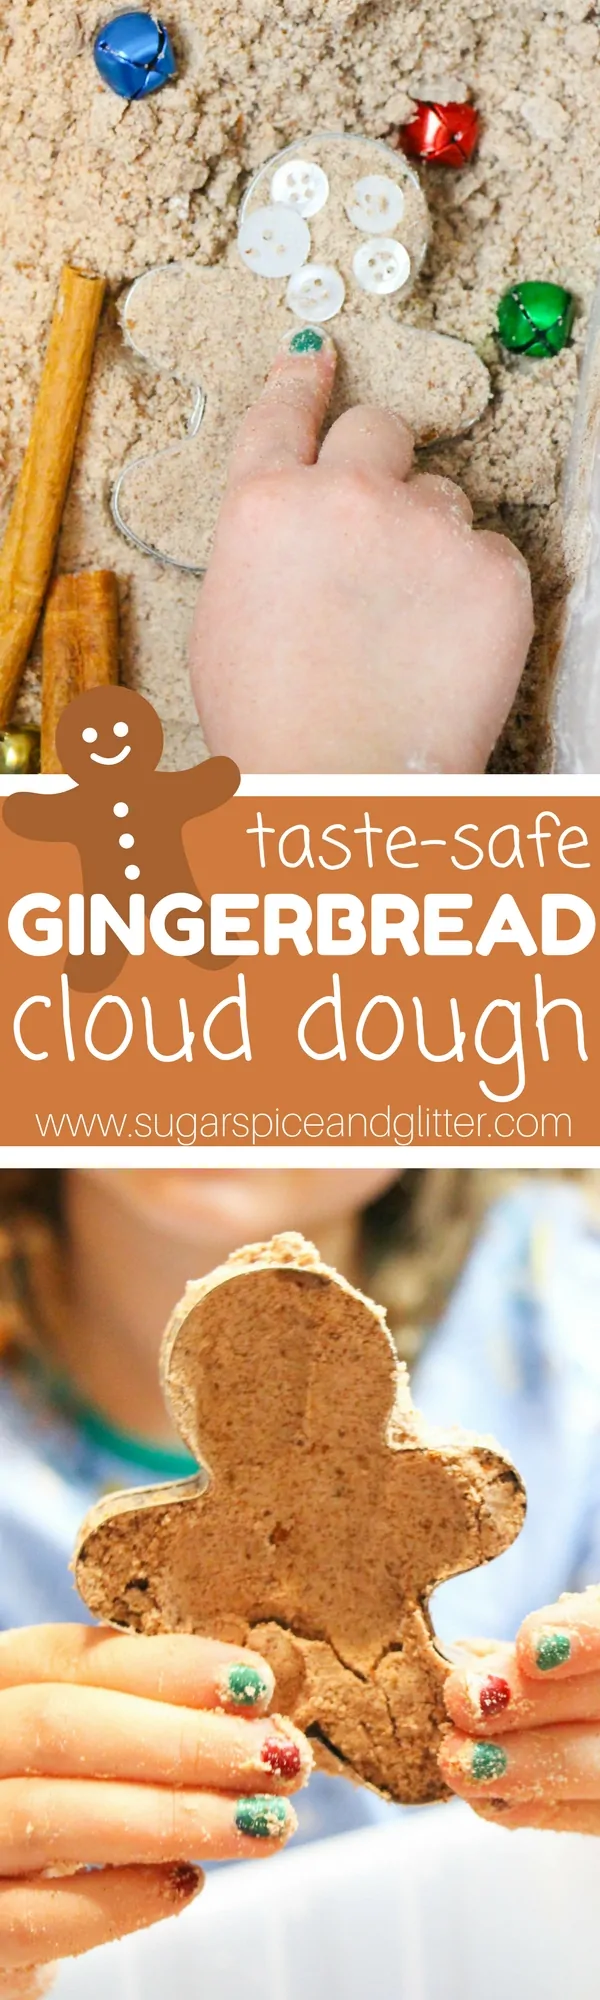 Run, run, run as fast as you can... to make this simple Gingerbread Baby-inspired cloud dough for kids! You probably have everything you need already in your kitchen for this simple gingerbread cloud dough recipe that is completely taste-safe